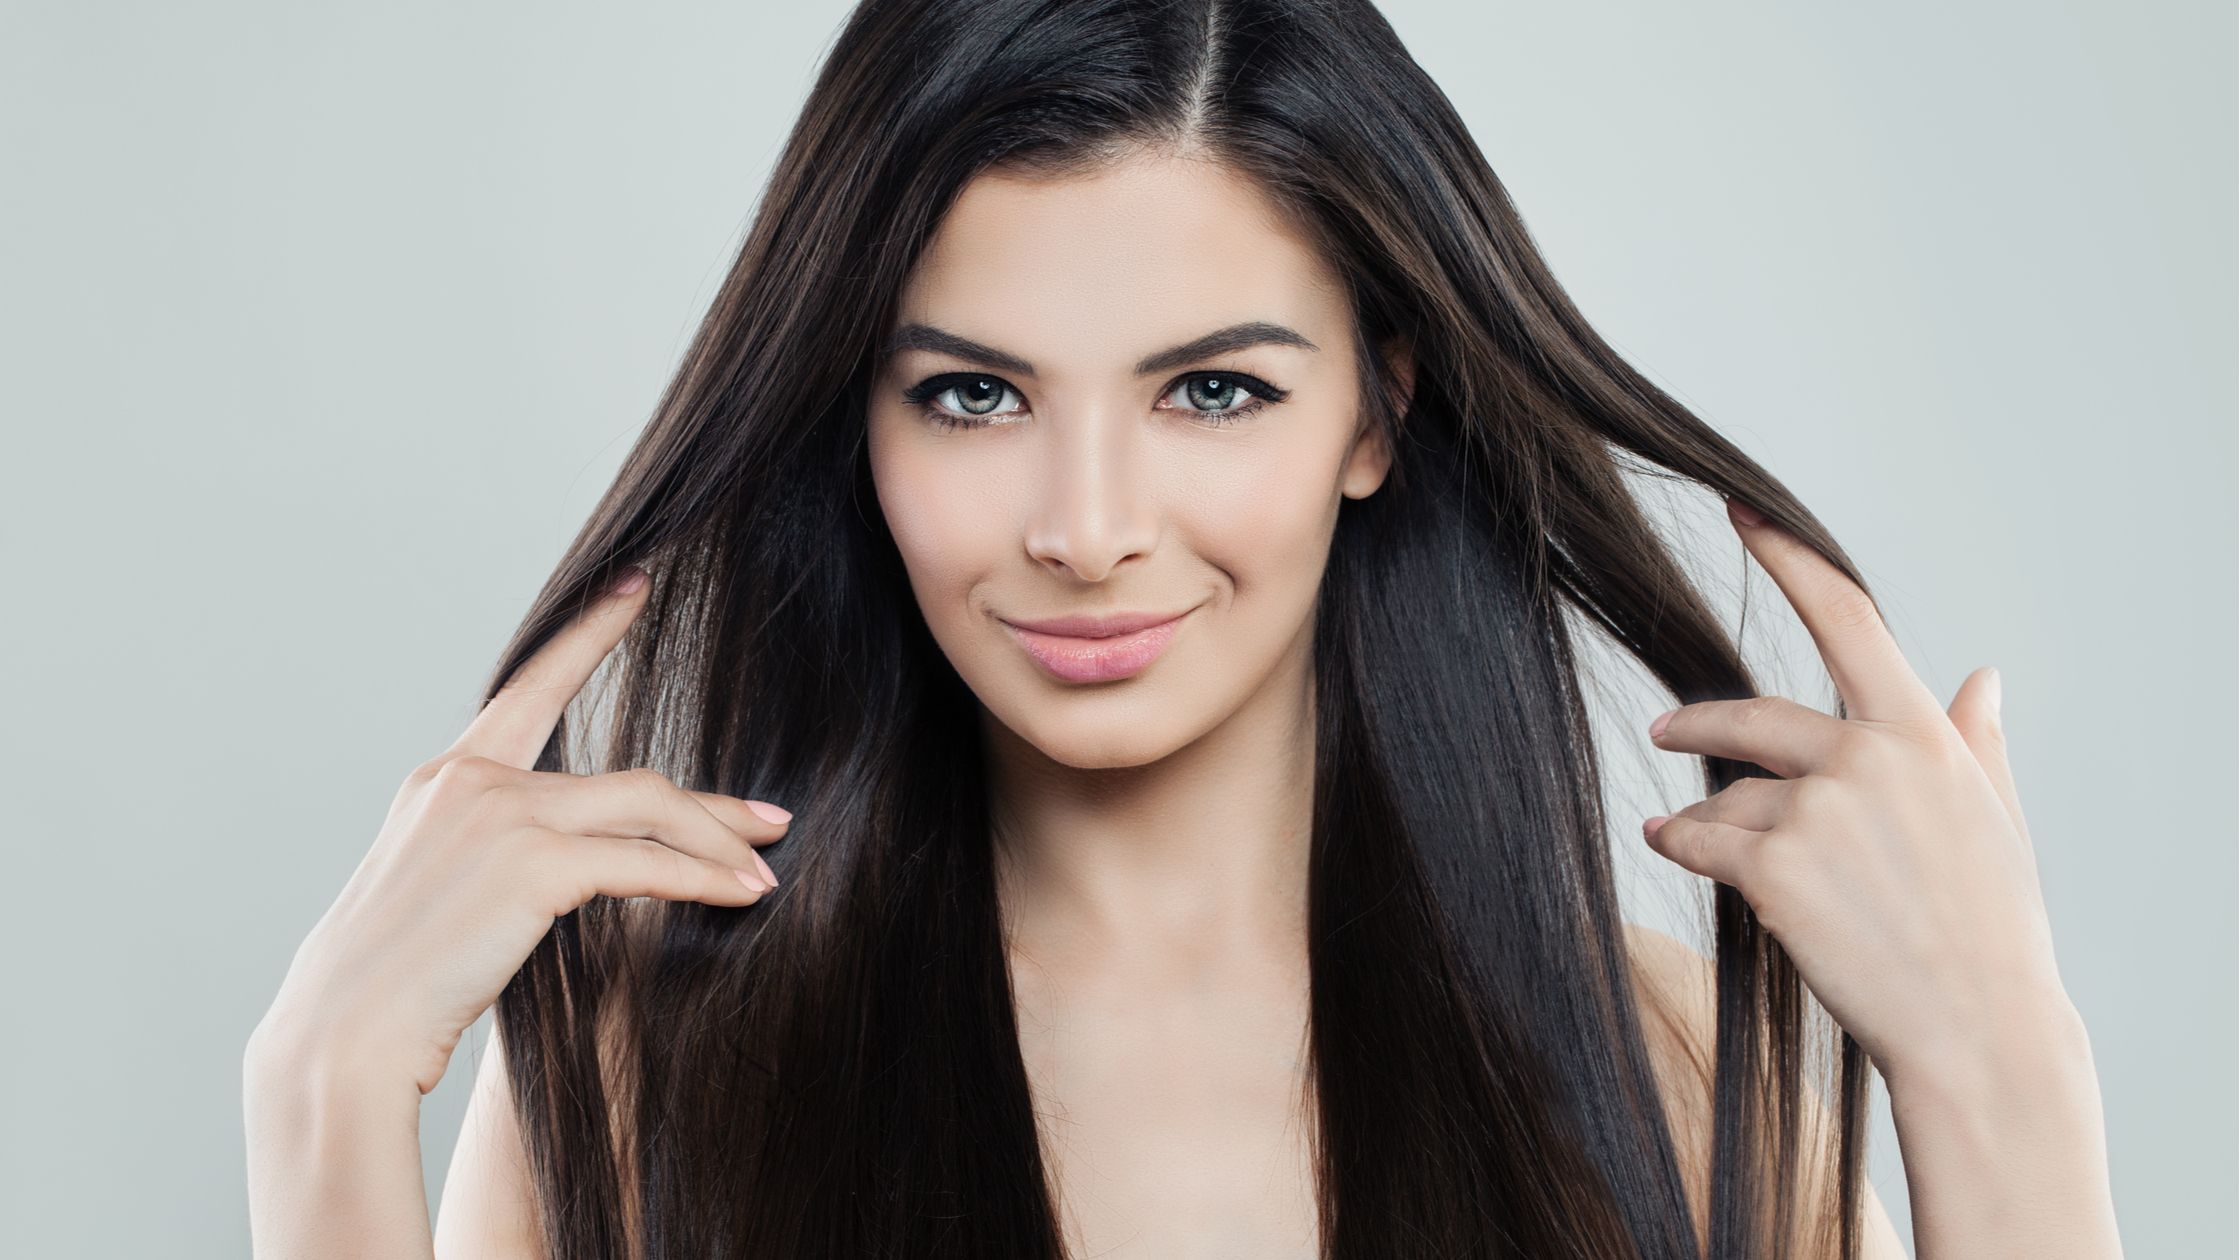 8 Home Remedies for Shiny and Smooth Hair - eMediHealth